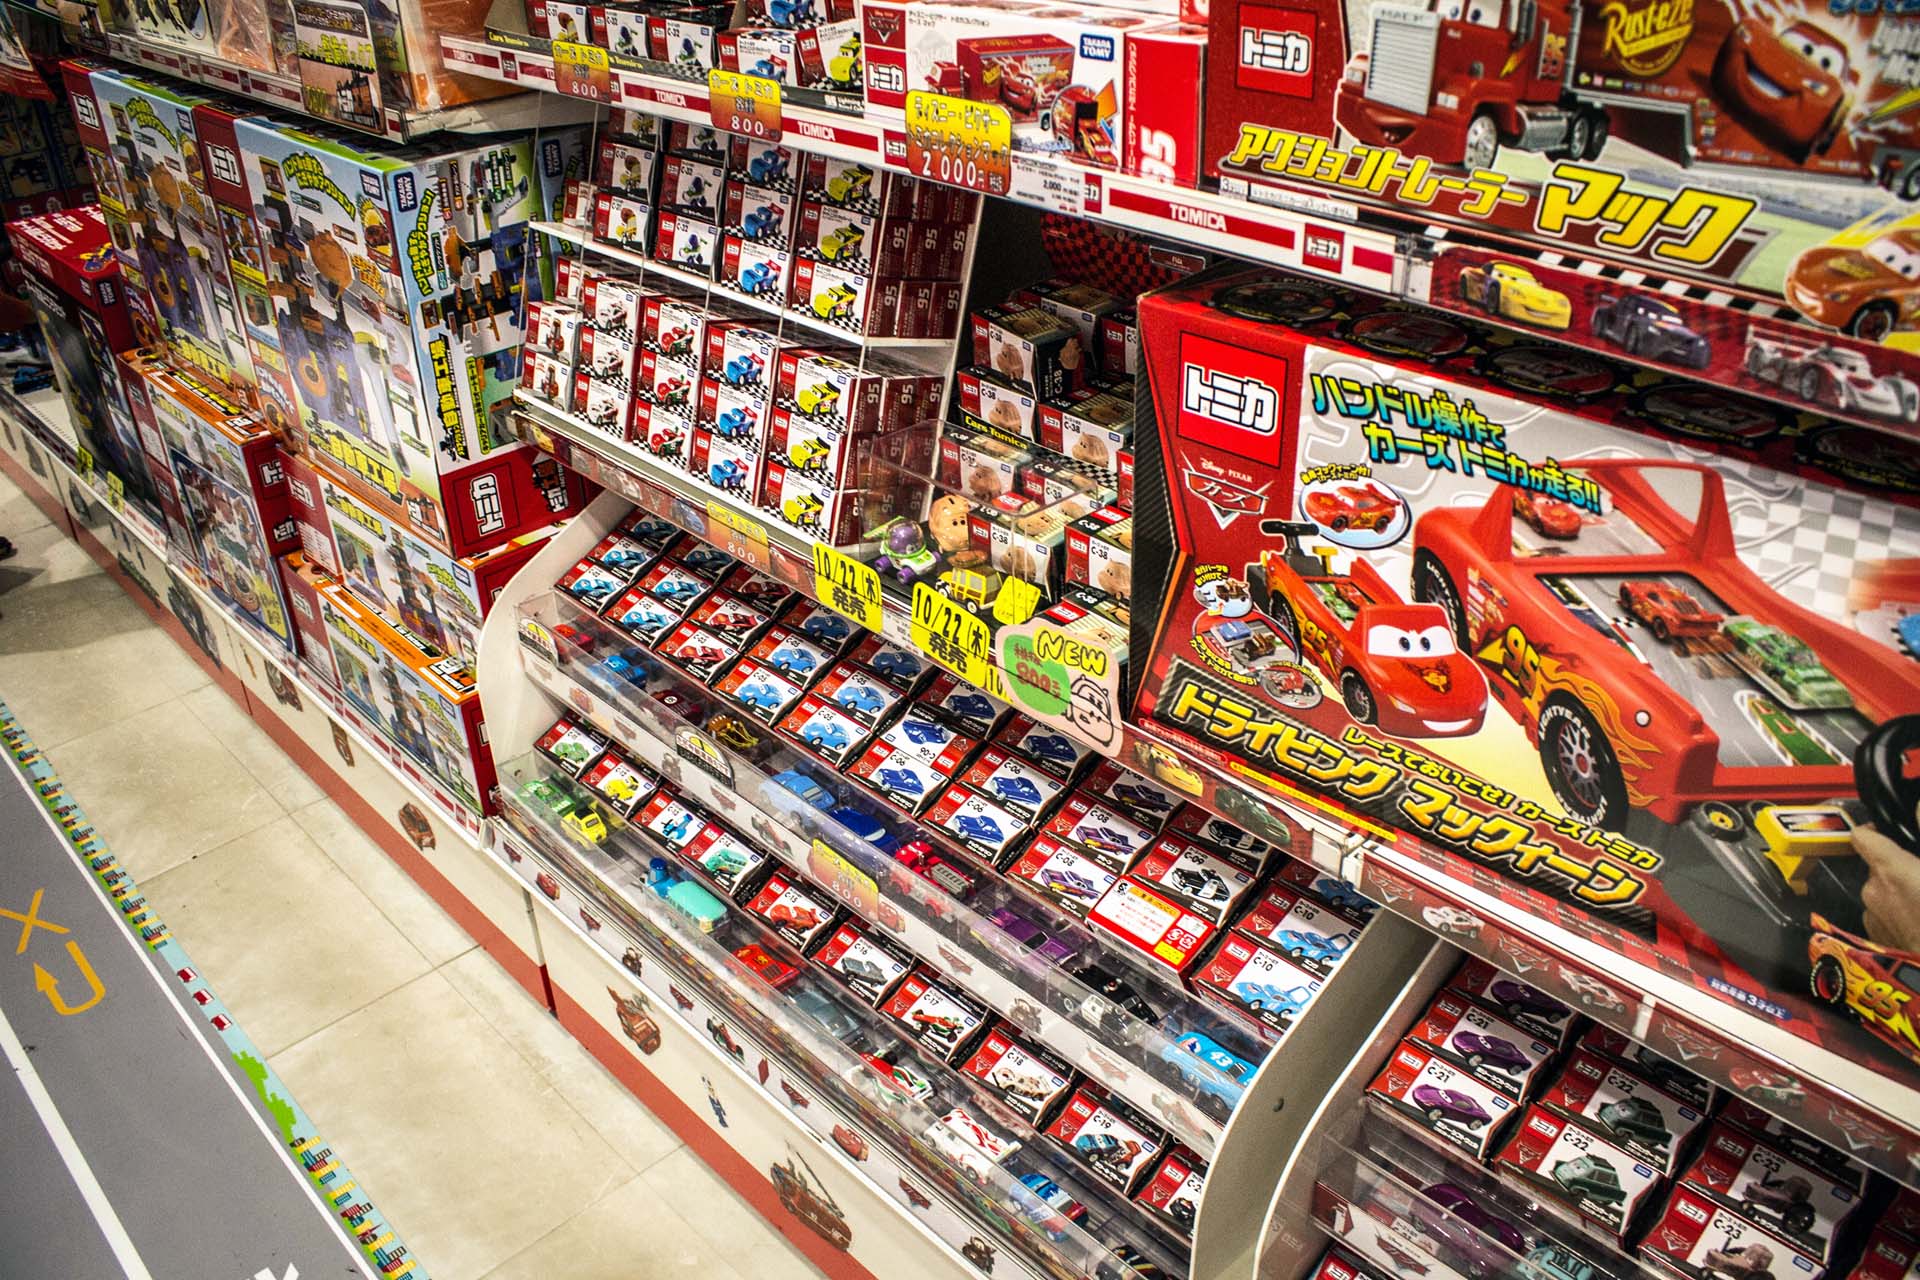 You can find Tomica cars at most toy stores in Japan, but they also have dedicated stores. This one was filled with playsets, including a full range branded with Disney's <i>Cars</i> movie.